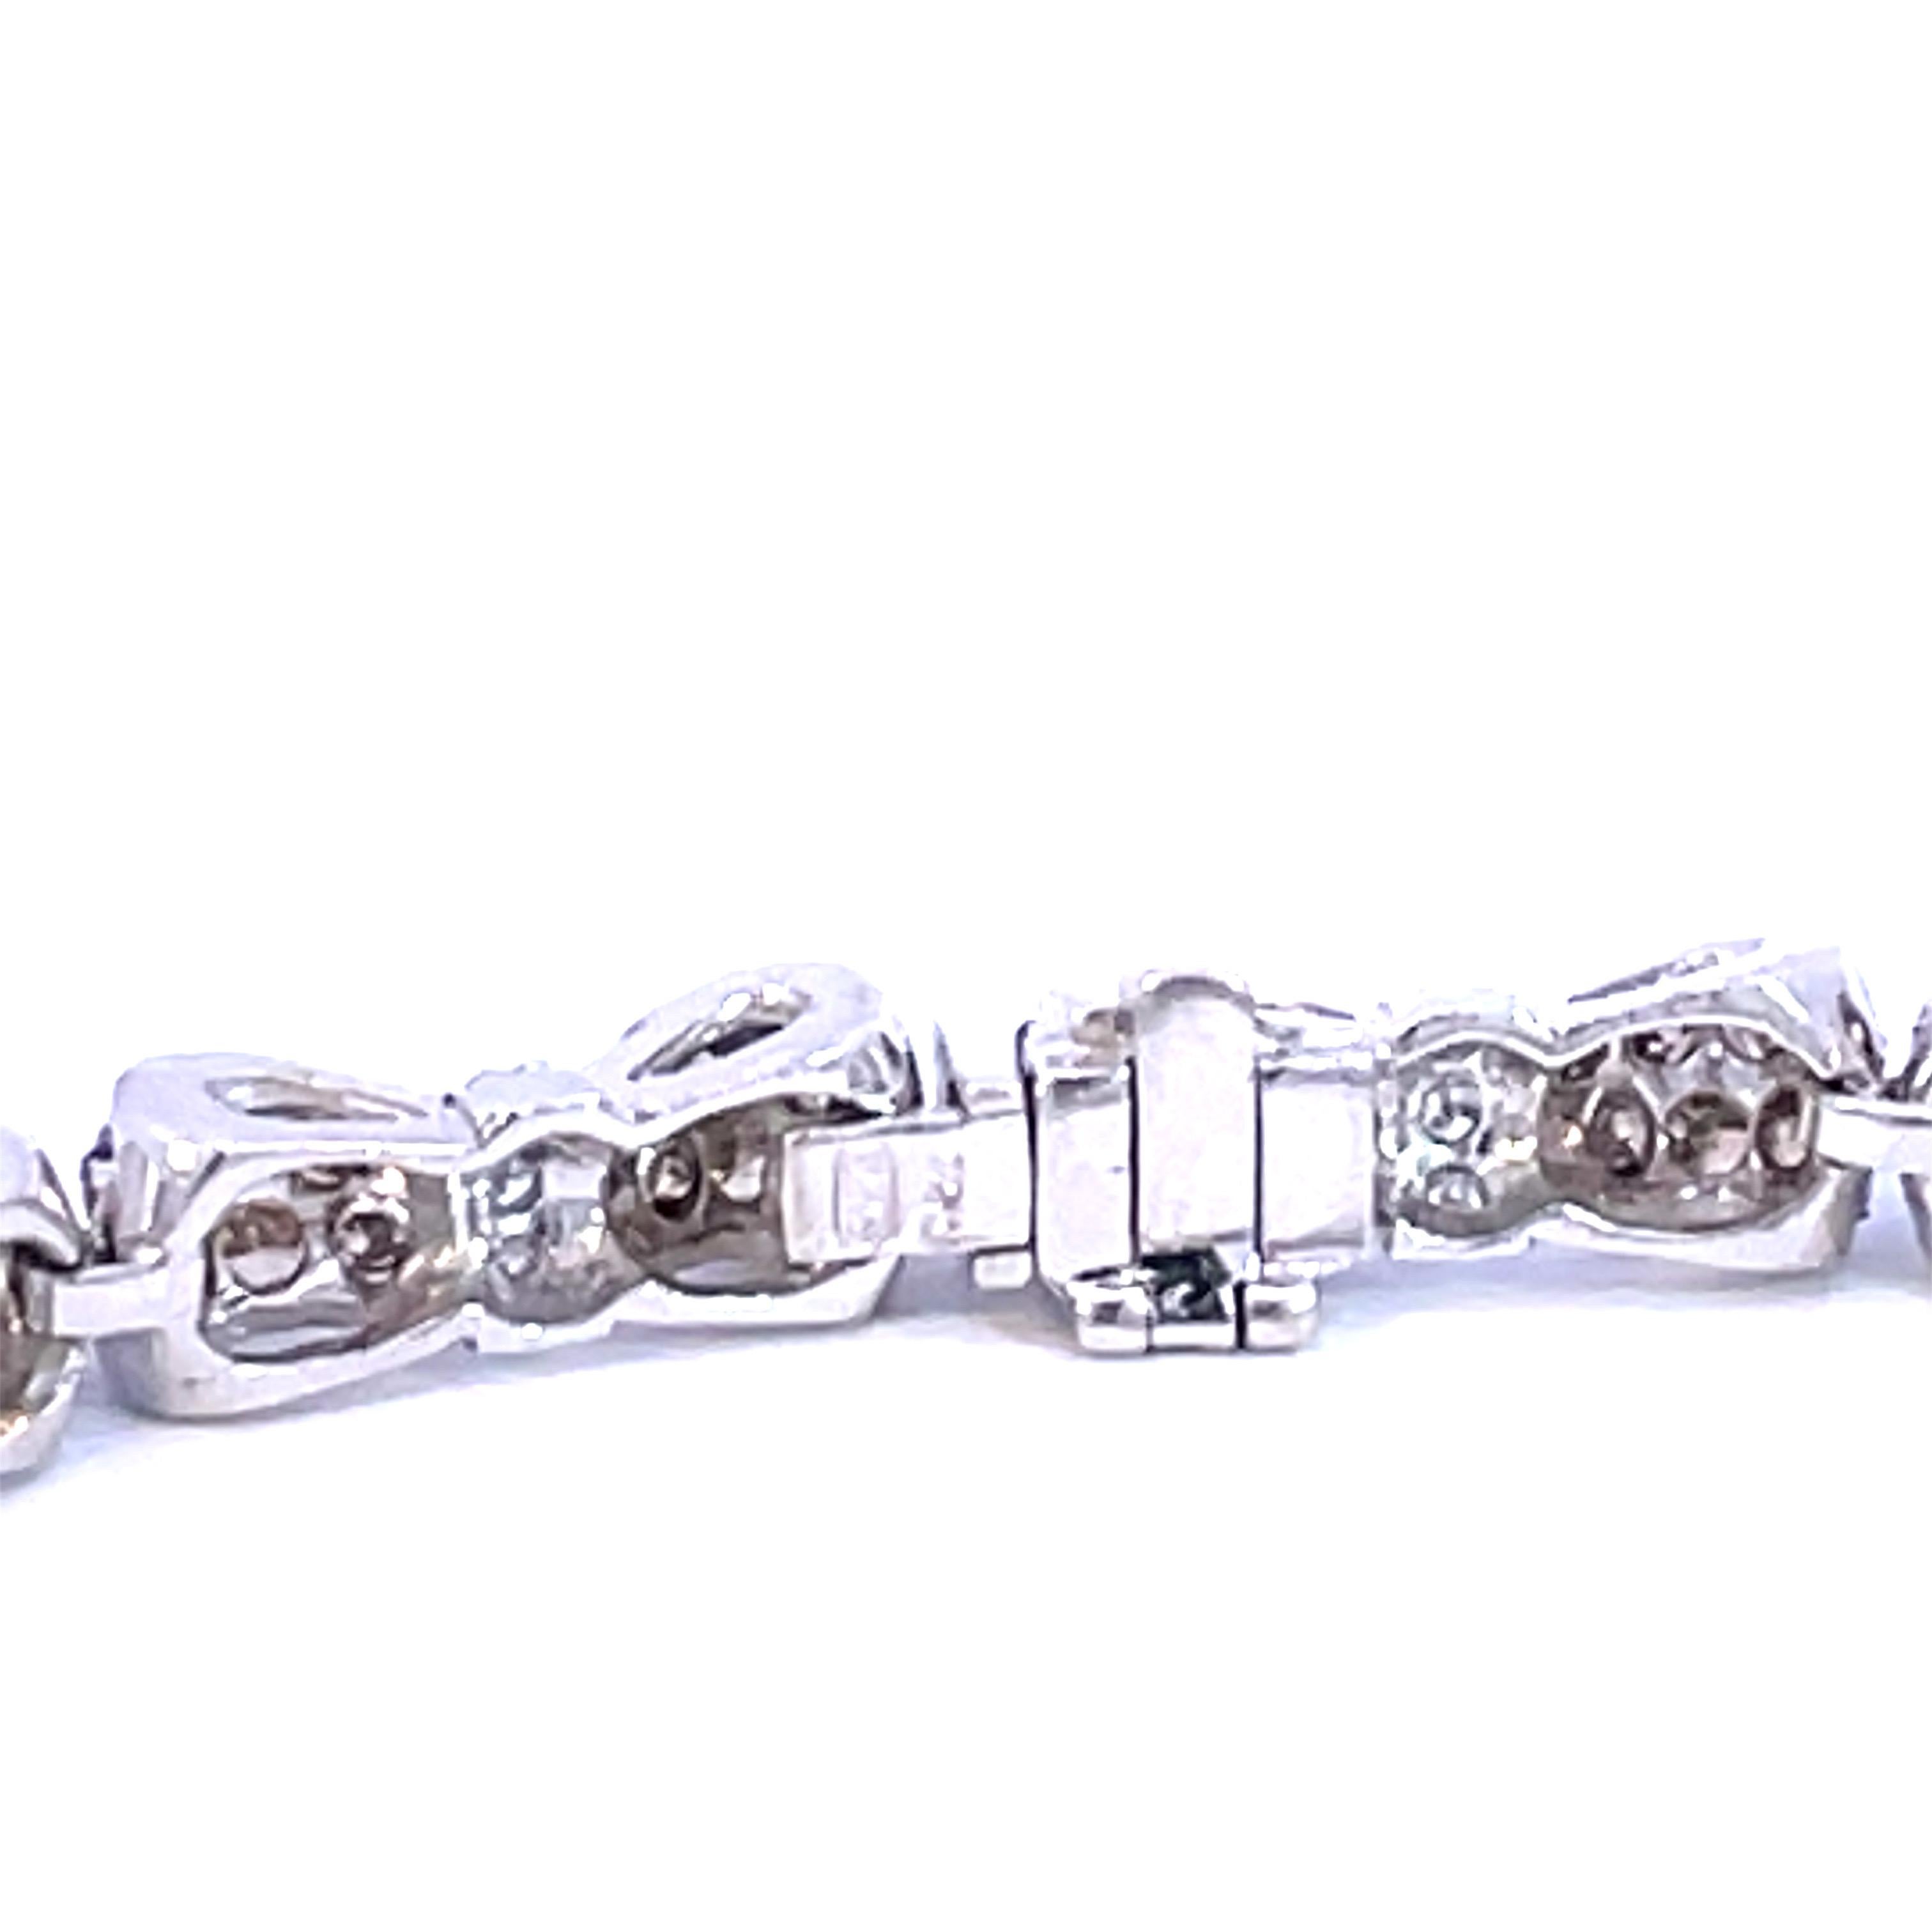 An Beautiful Bow Tie Bracelet set with natural brown diamonds and natural white diamonds in 18kt white gold.

144 natural brown diamonds weighing 6.00ct total weight

36 natural white diamonds weighing 0.30ct total weight

18kt white gold, 18g